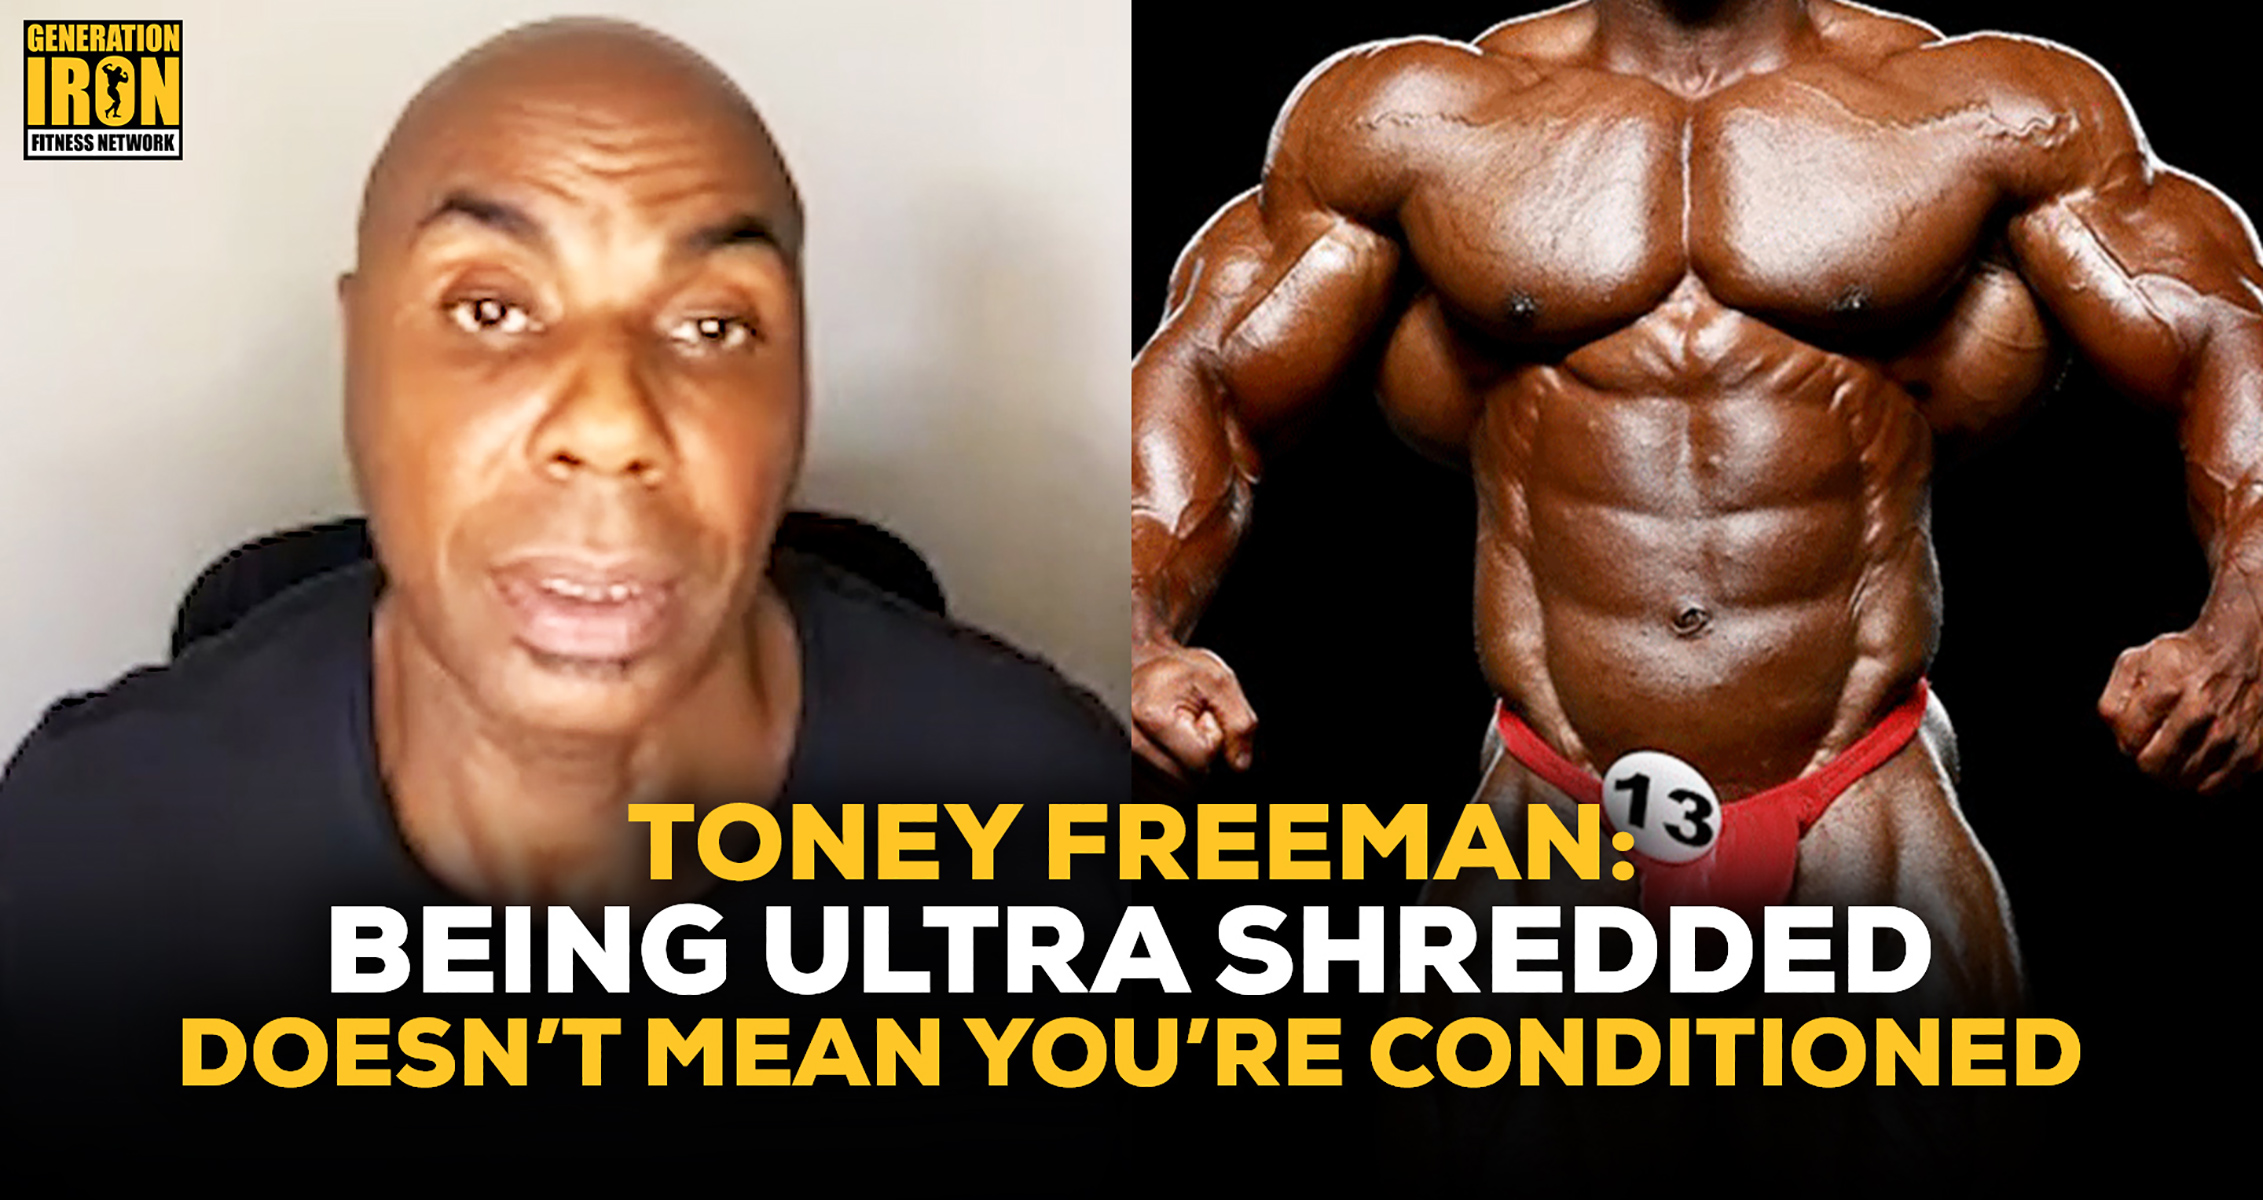 Toney Freeman: Being Ultra Shredded Doesn’t Mean A Bodybuilder Is Conditioned